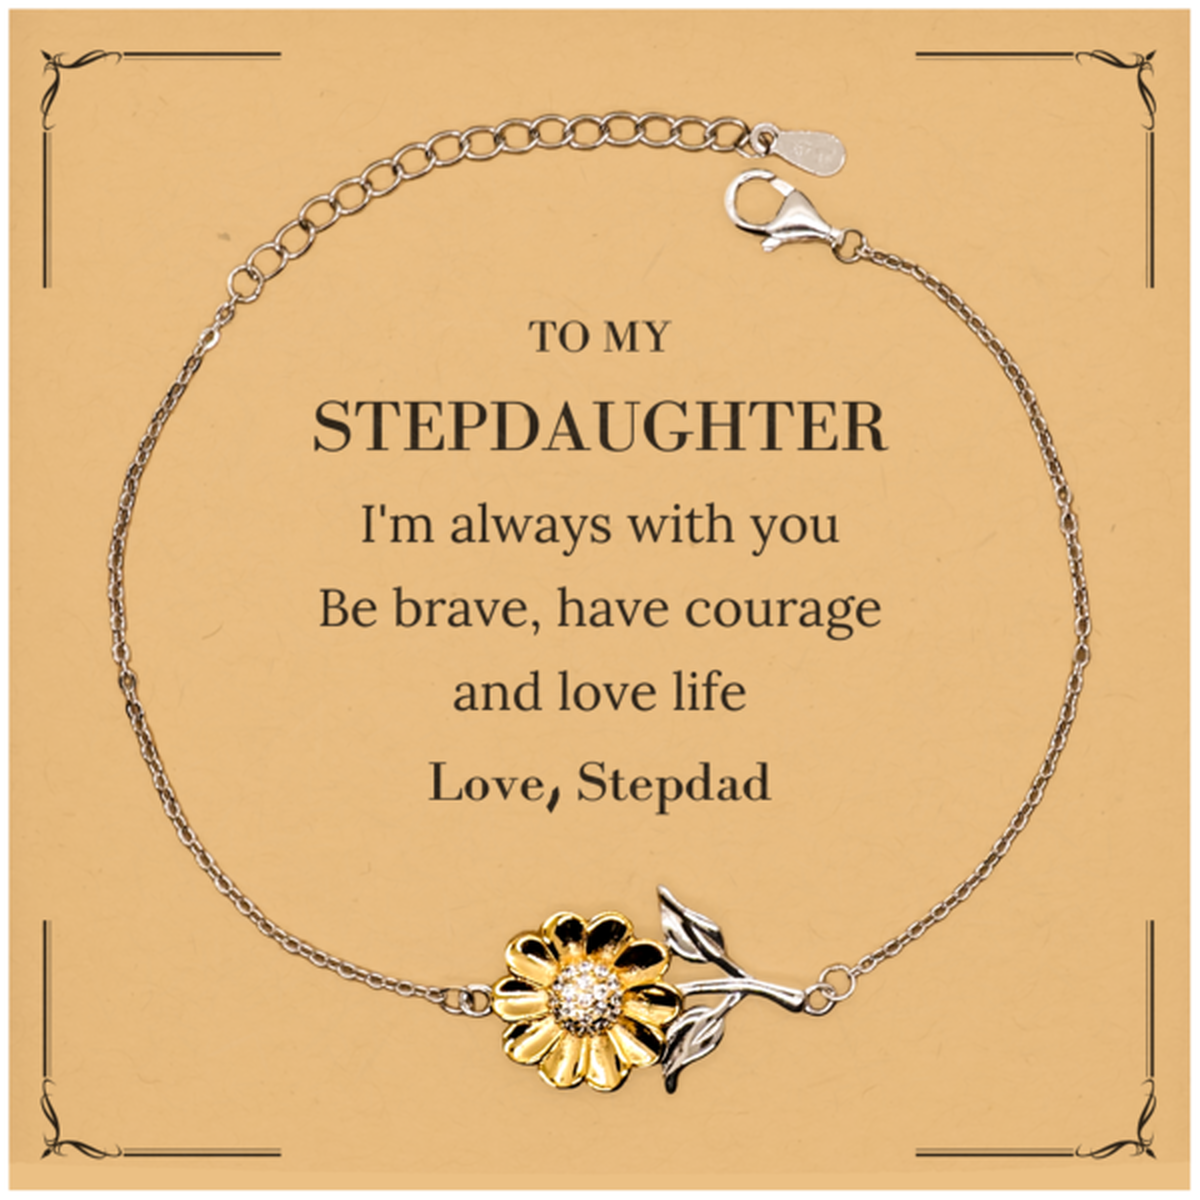 To My Stepdaughter Gifts from Stepdad, Unique Sunflower Bracelet Inspirational Christmas Birthday Graduation Gifts for Stepdaughter I'm always with you. Be brave, have courage and love life. Love, Stepdad